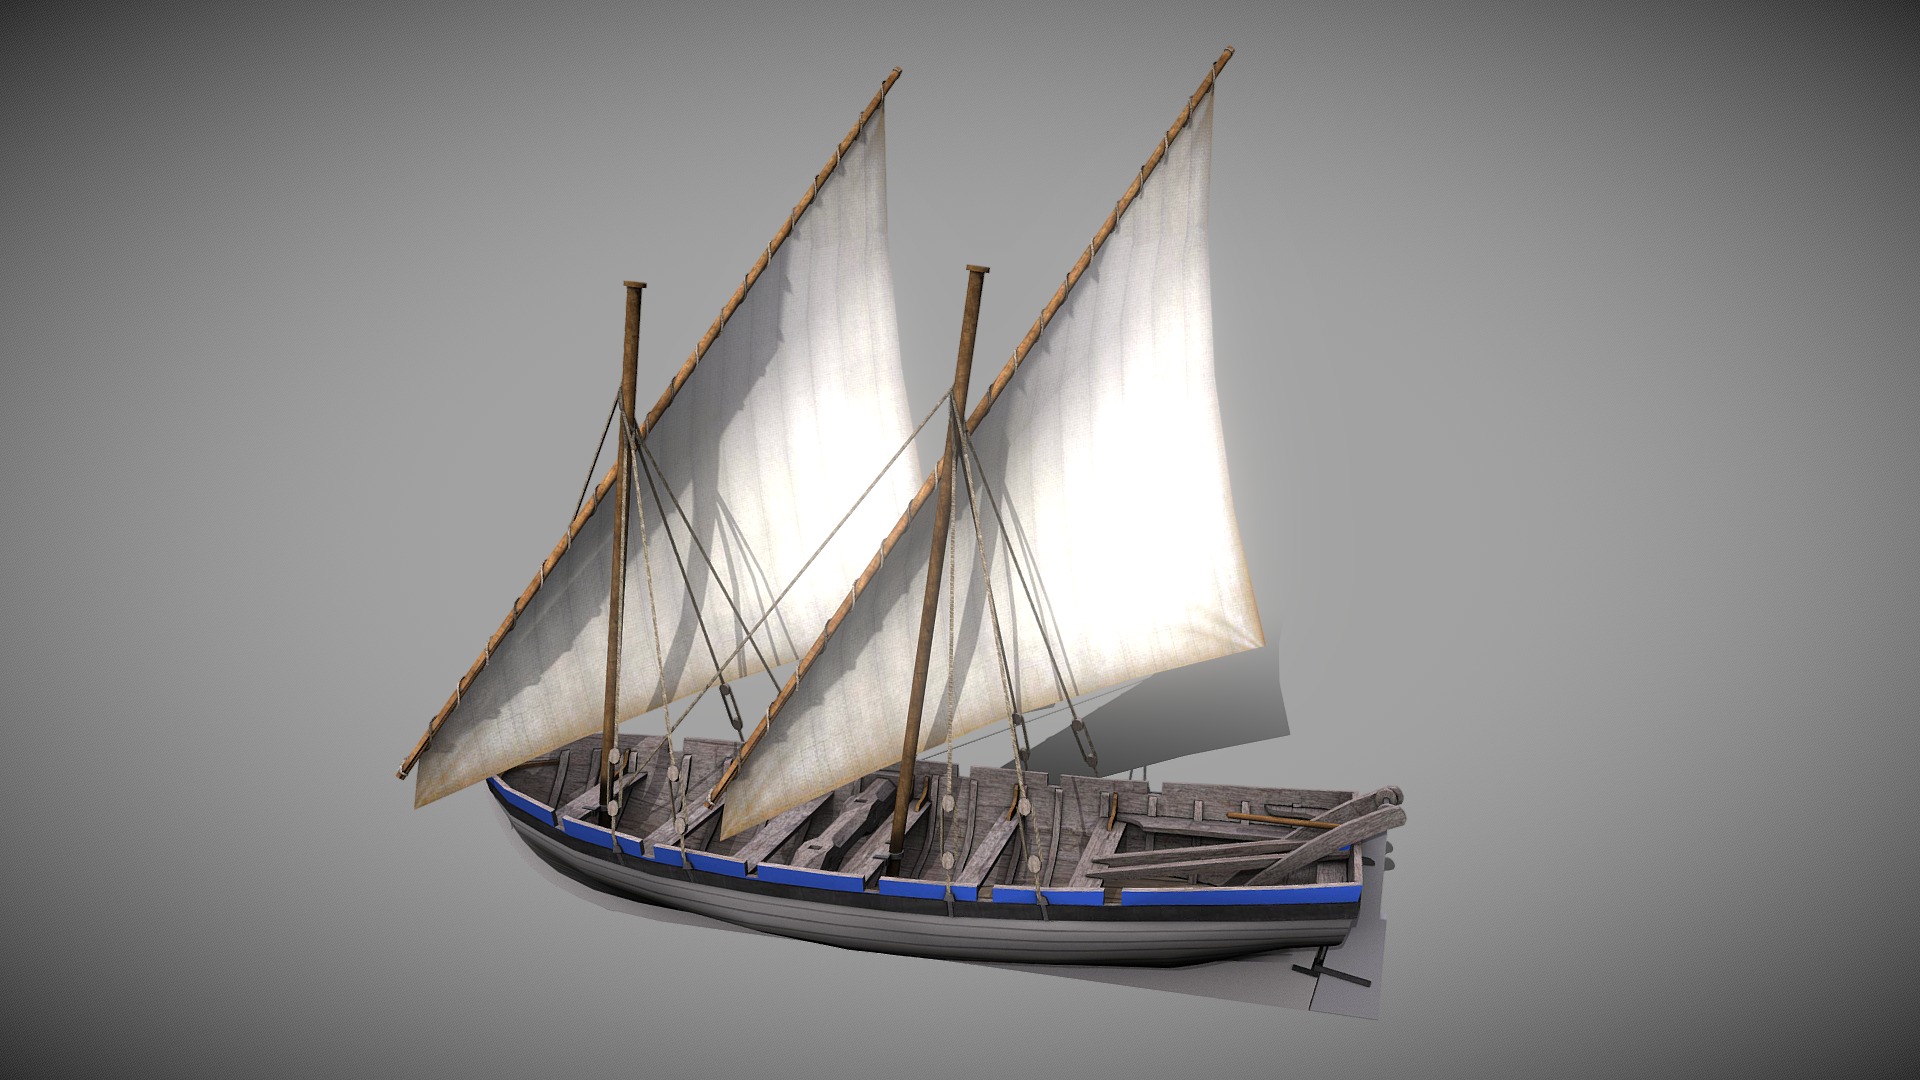 3D model 24ft Launch (1765) - This is a 3D model of the 24ft Launch (1765). The 3D model is about a white sailboat on water.